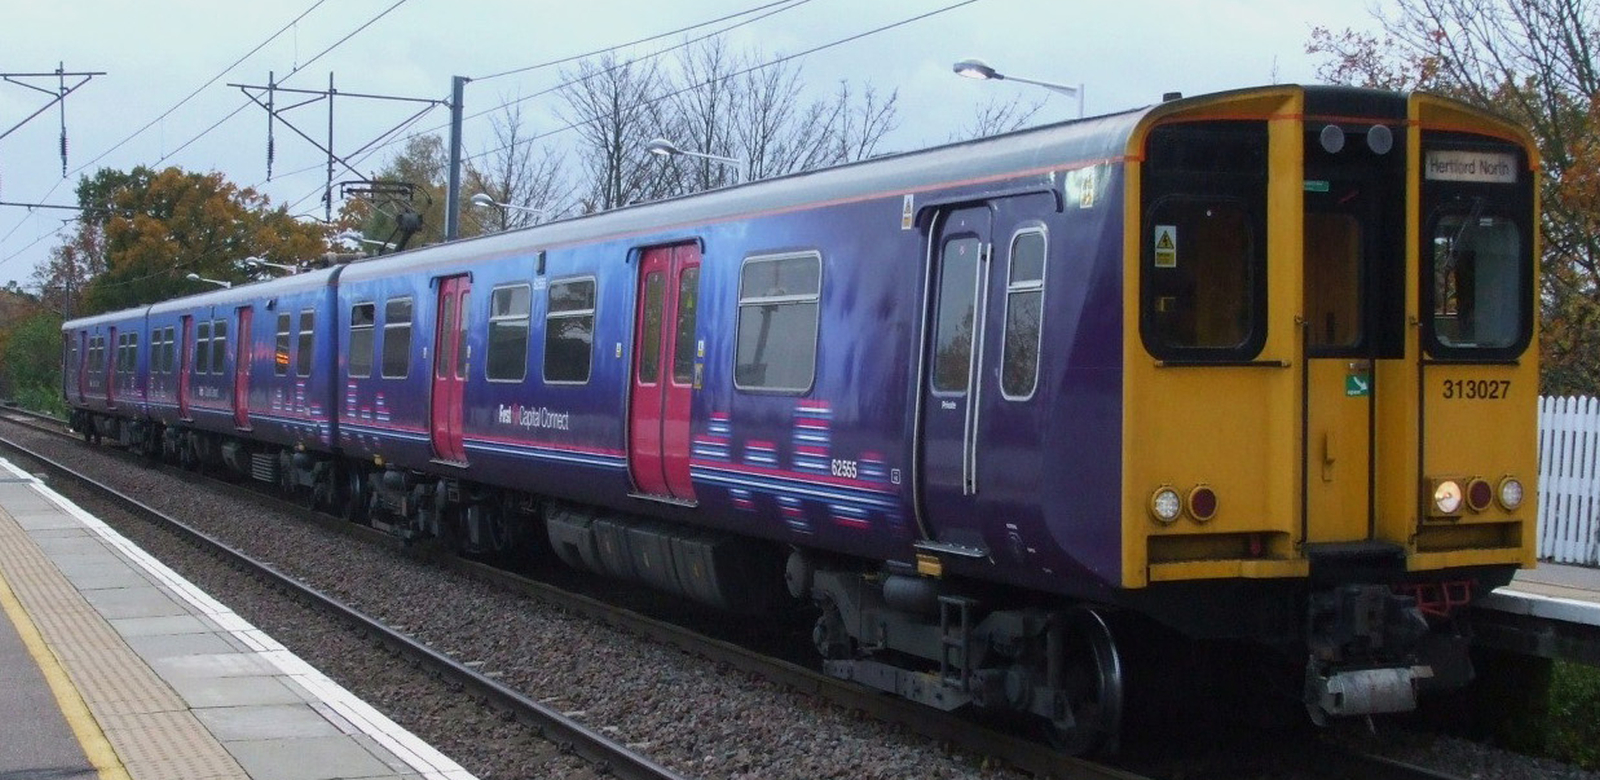 First Capital Connect 313027 in February 2010 at Grange Park station